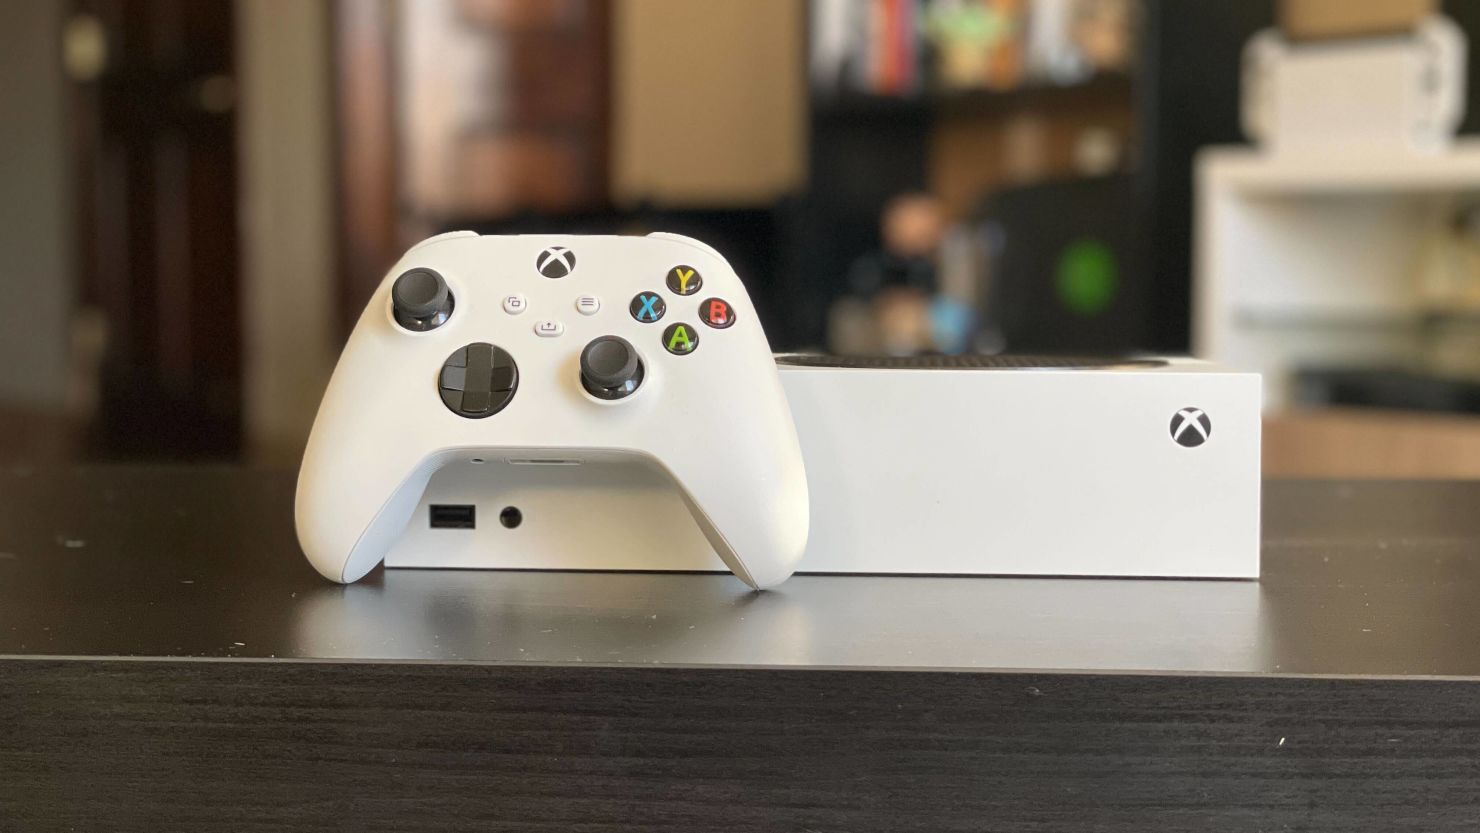 Xbox Series S on sale for $250, its lowest price ever